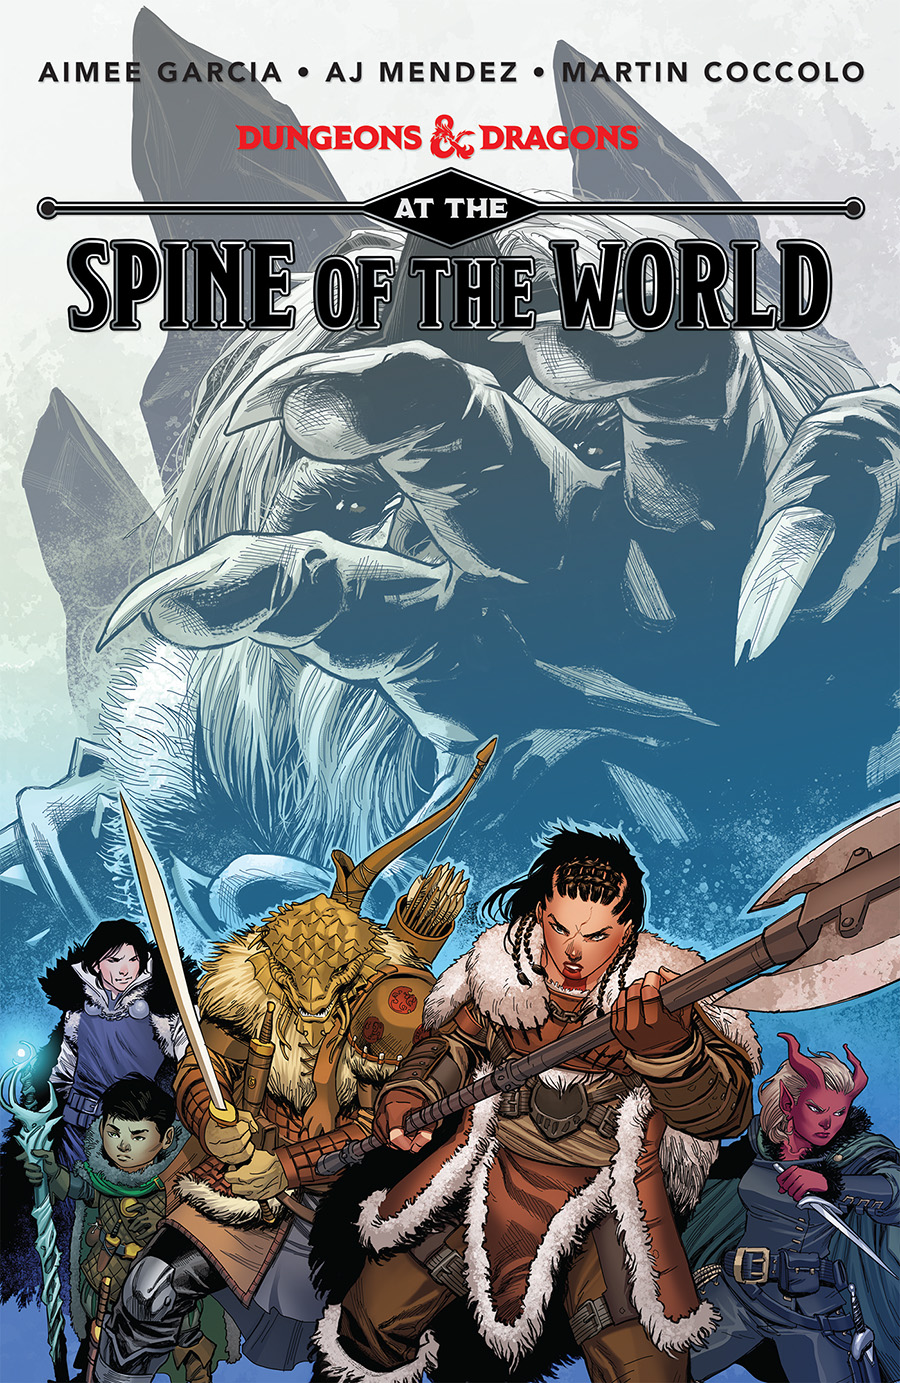 Dungeons & Dragons At The Spine Of The World TP